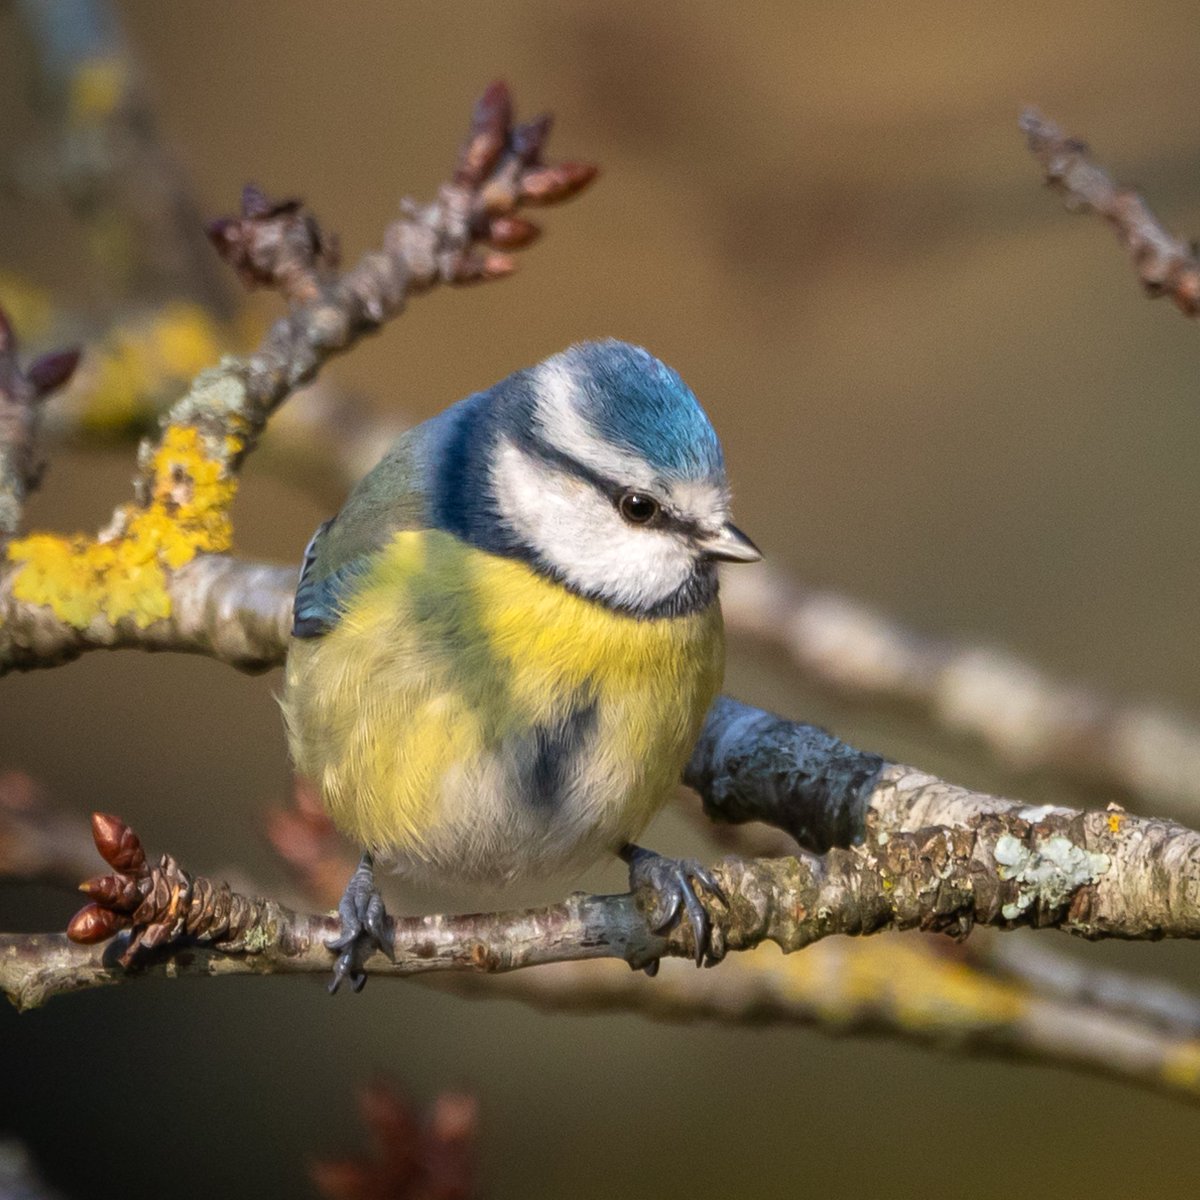 Good morning all. One of the many colourful and cute Blue tits hanging out in the orchard. Wishing everyone a happy and safe Sunday. #TwitterNatureCommunity #TwitterNaturePhotography #naturelovers #nature #birds #birdphotography #wildlife andyjennerphotography.com